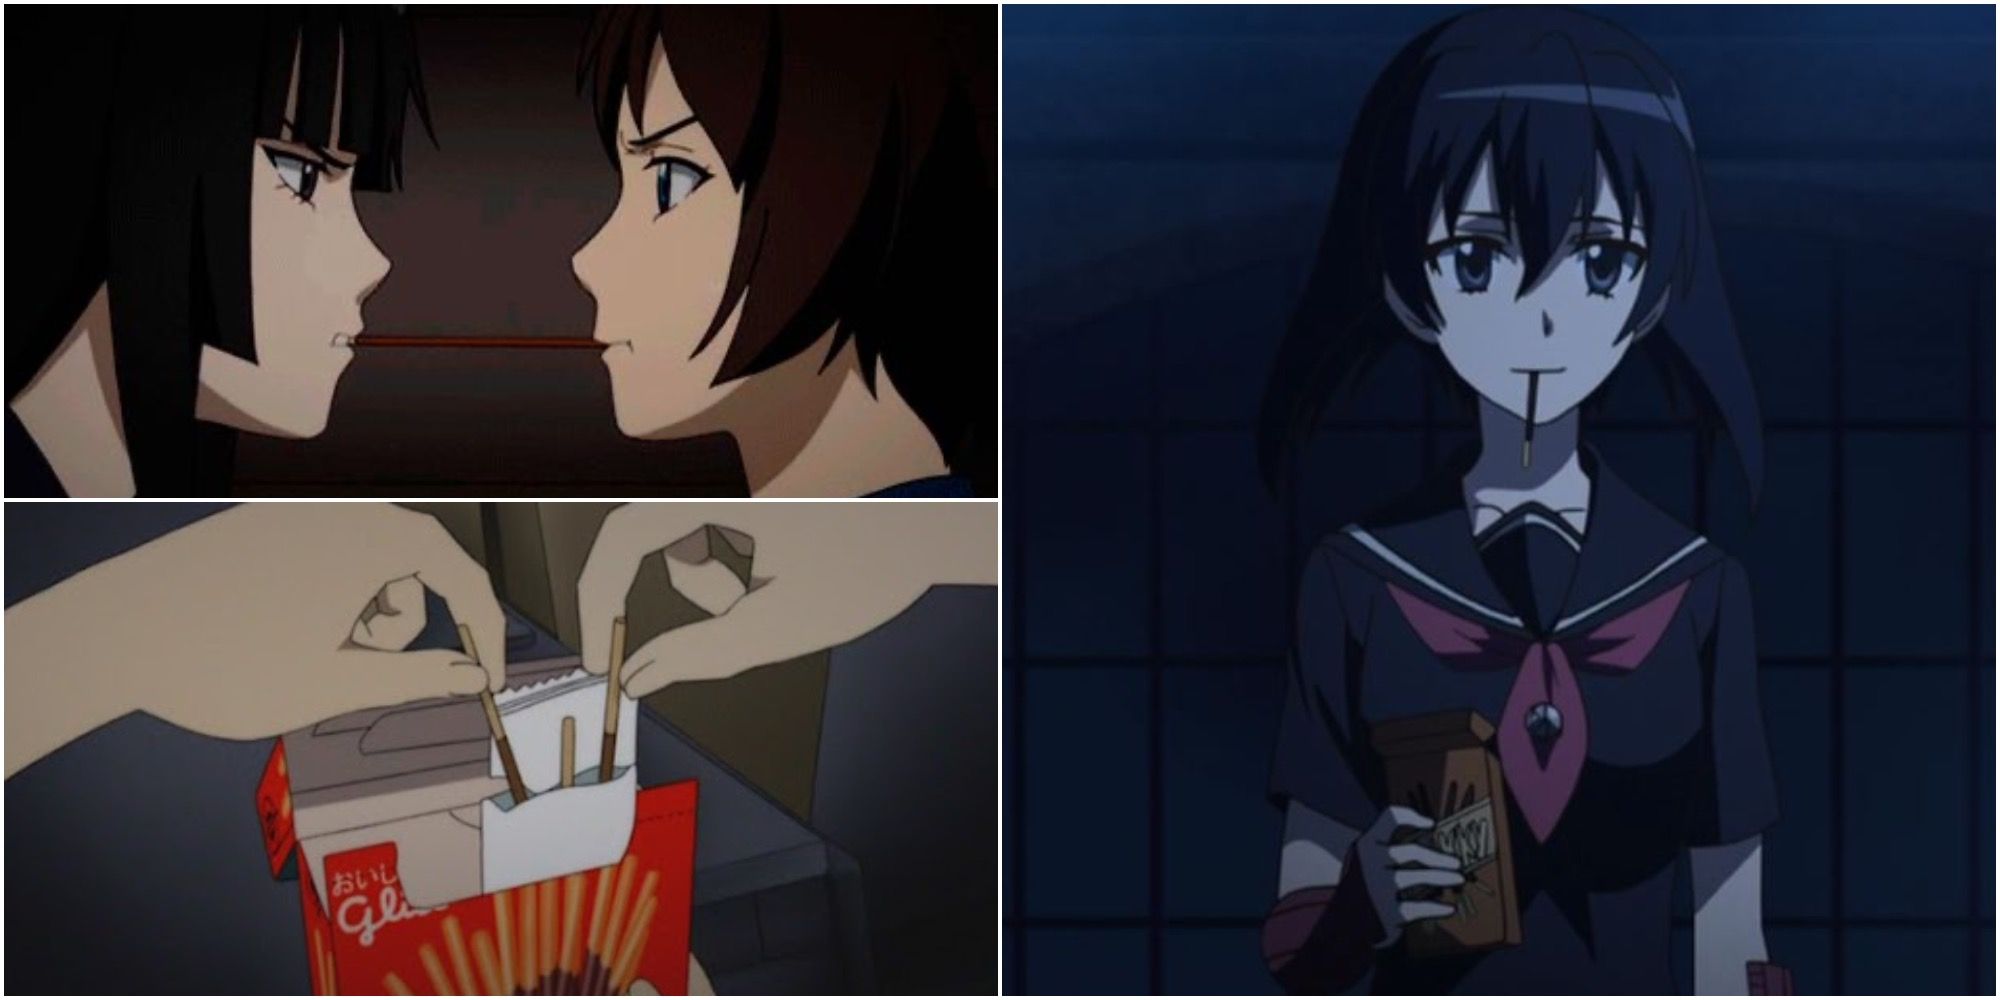 Collage Of Anime Girls From Agame La Kill And Ga Rei Zero Eating Pocky